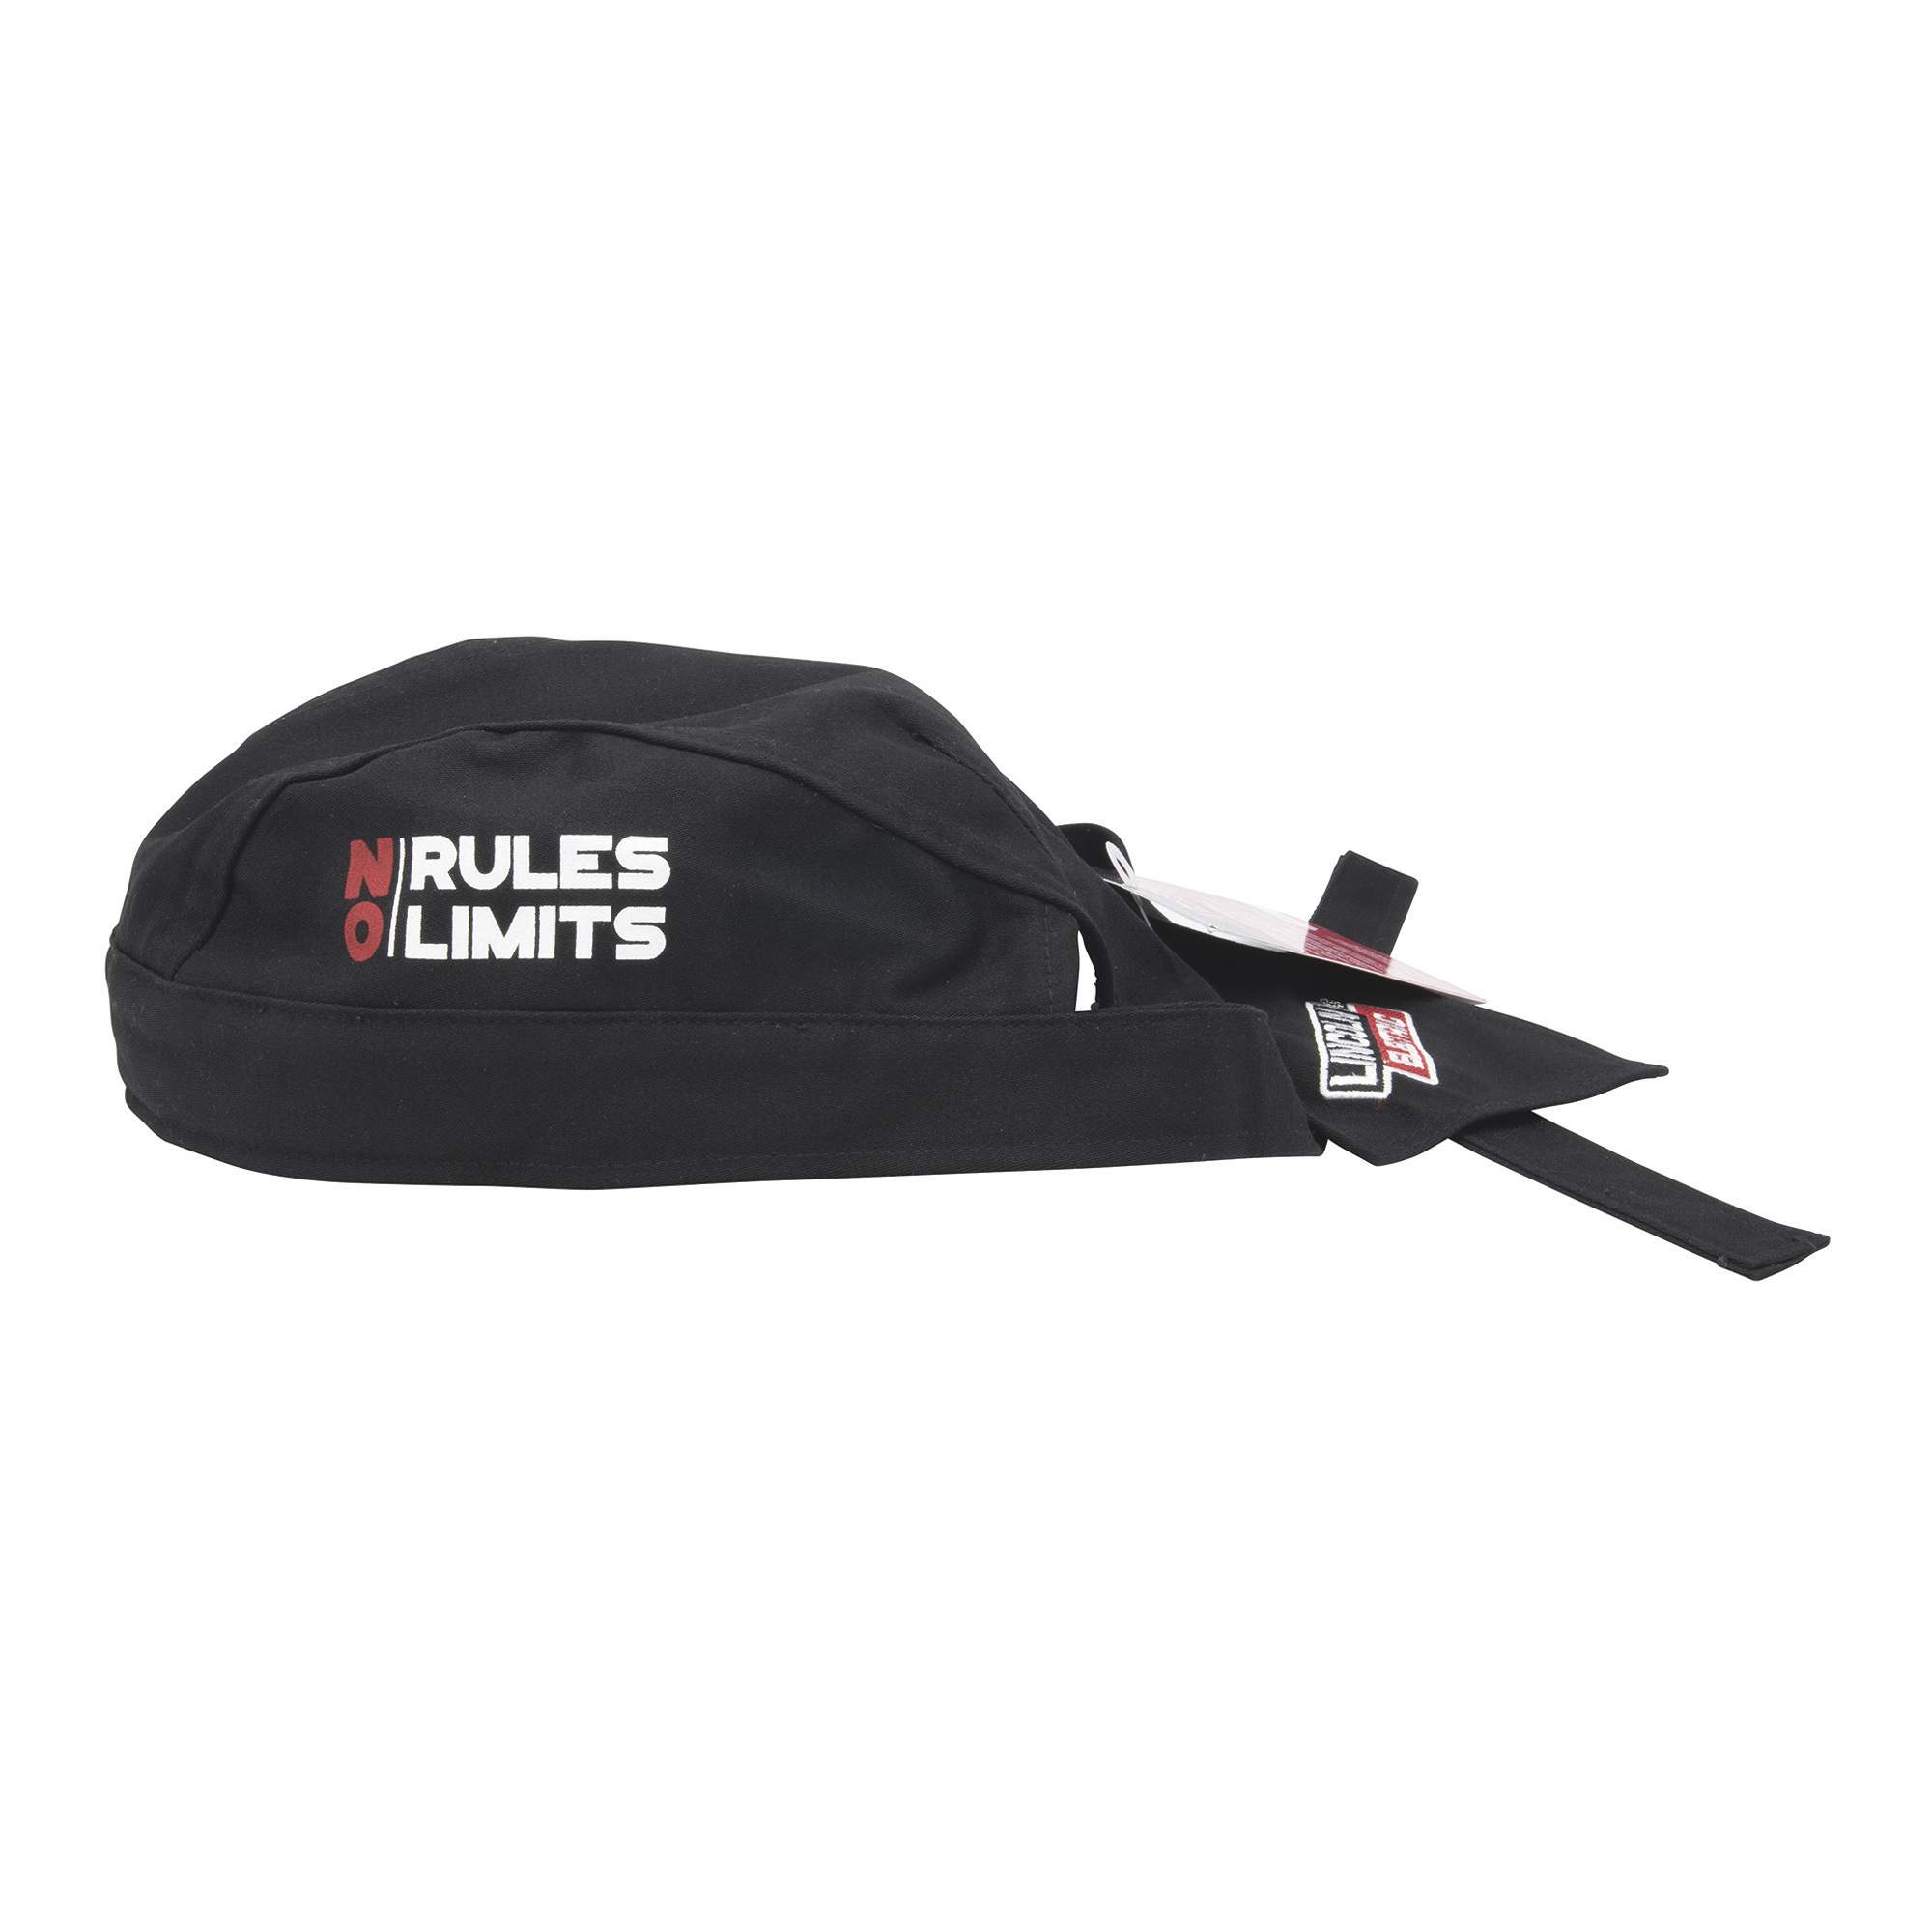 Lincoln Electric NO RULES NO LIMITS Welding Doo Rag, One Size Fits Most, Black, Model KH851